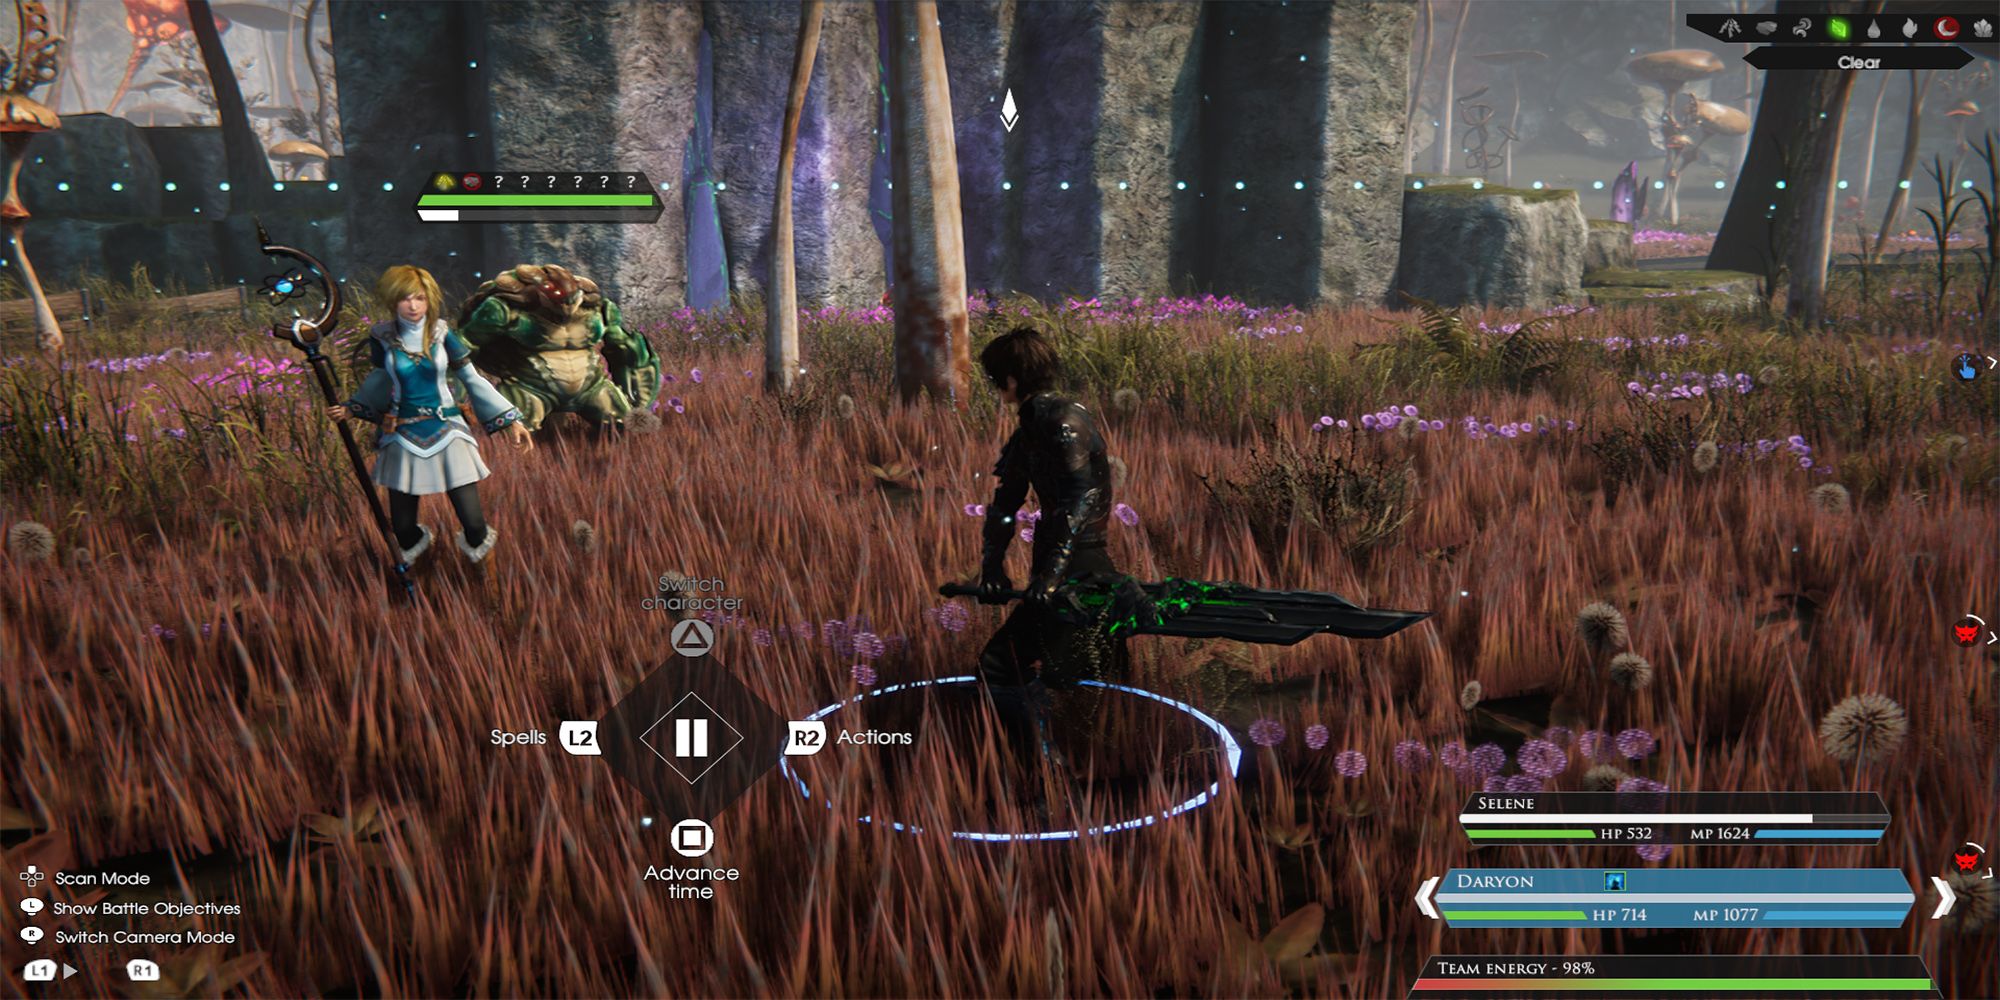 Daryon faces off in a battle against a cancer arbiter in the Marsh of Alasea in Edge of Eternity.